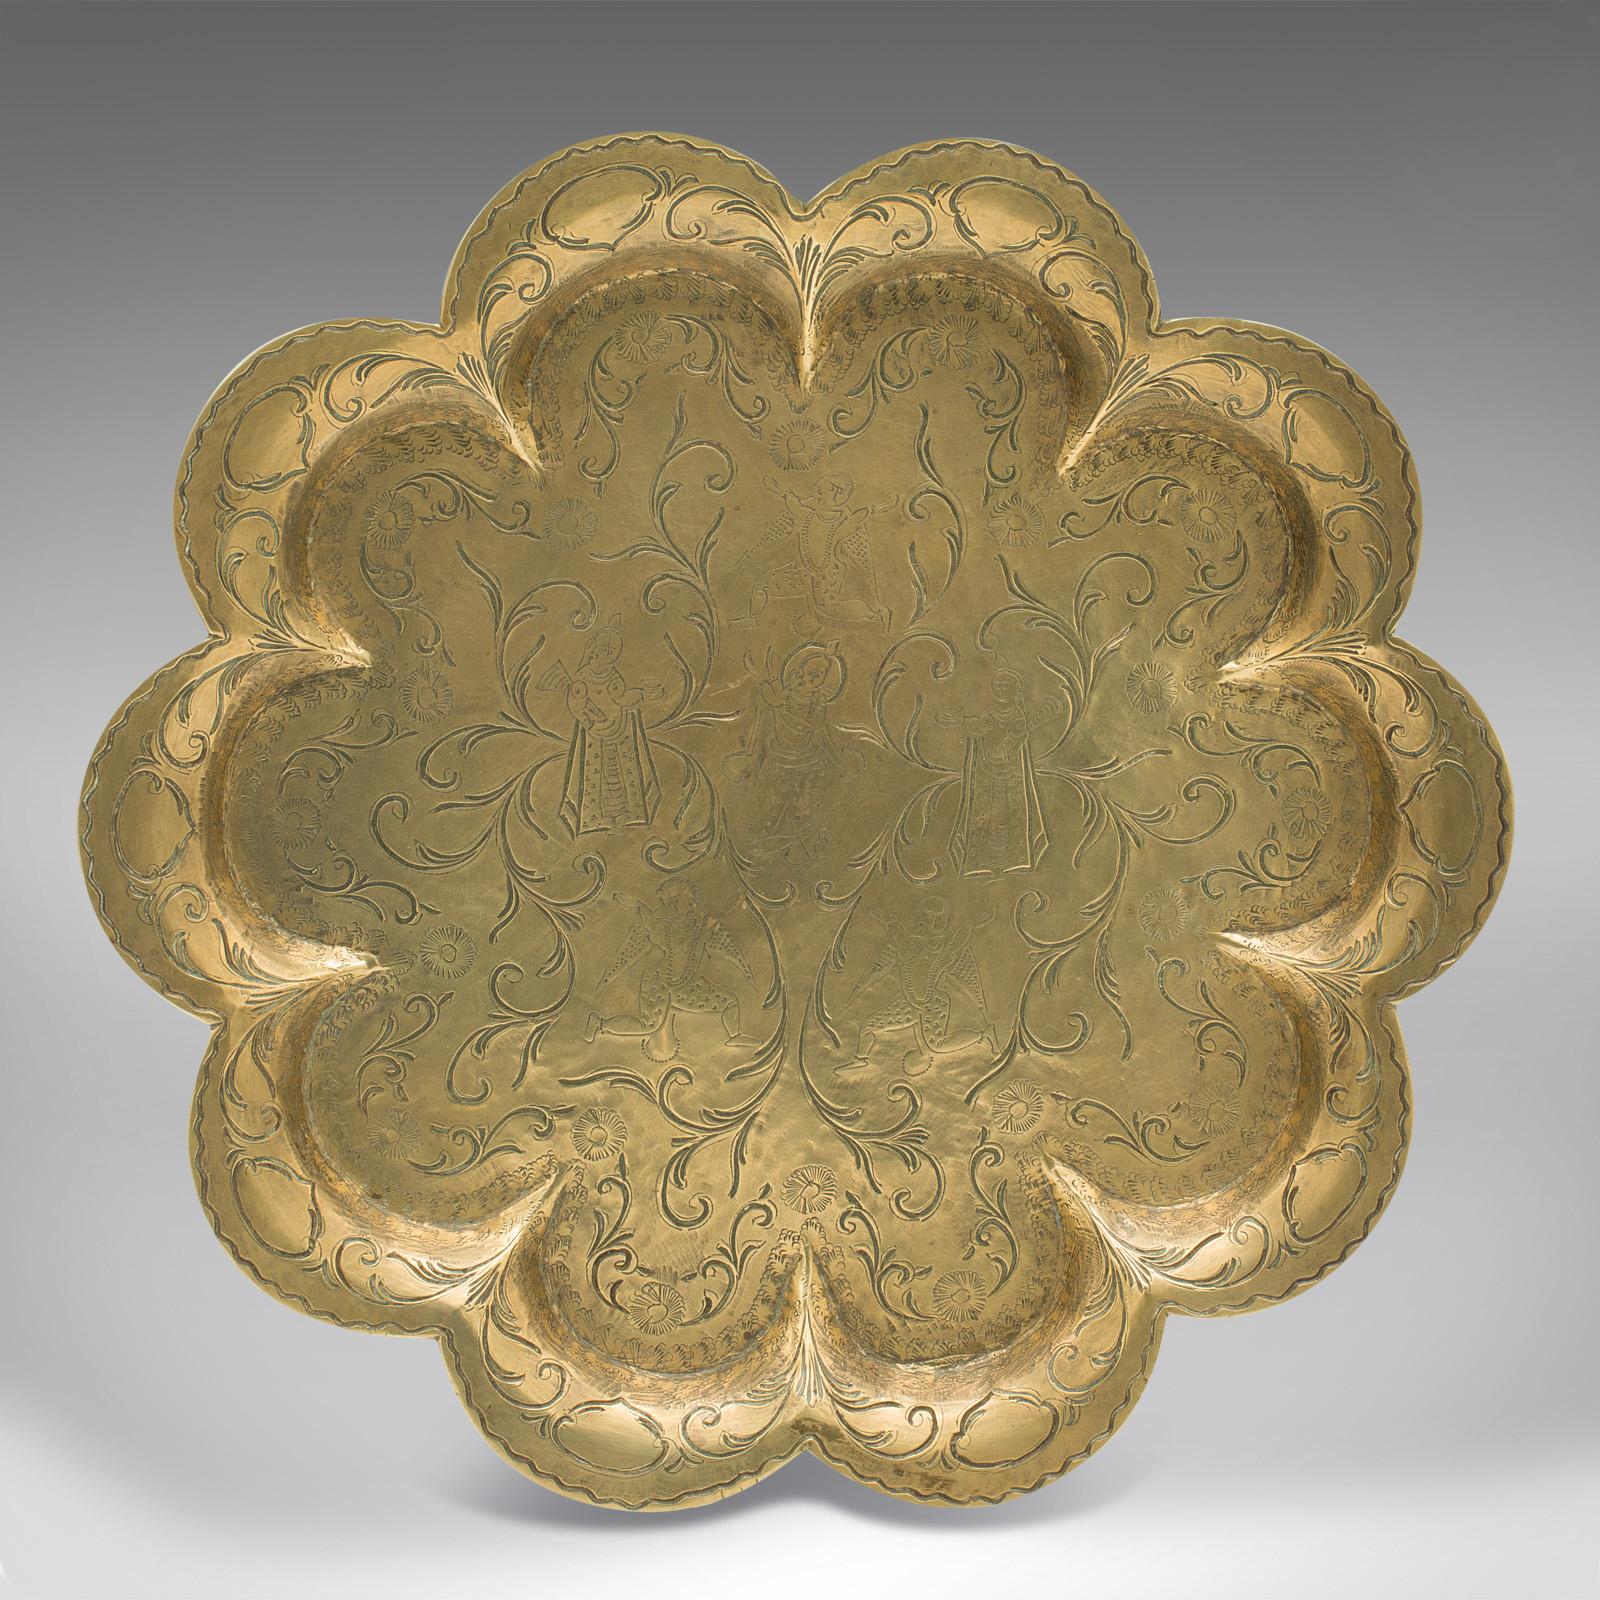 This is an antique decorative charger. An Indian, brass decagon dished plate with fine engraved detail, dating to the late Victorian period, circa 1880.

Fascinating foliate form with great colour and decorative finish
Displays a desirable aged